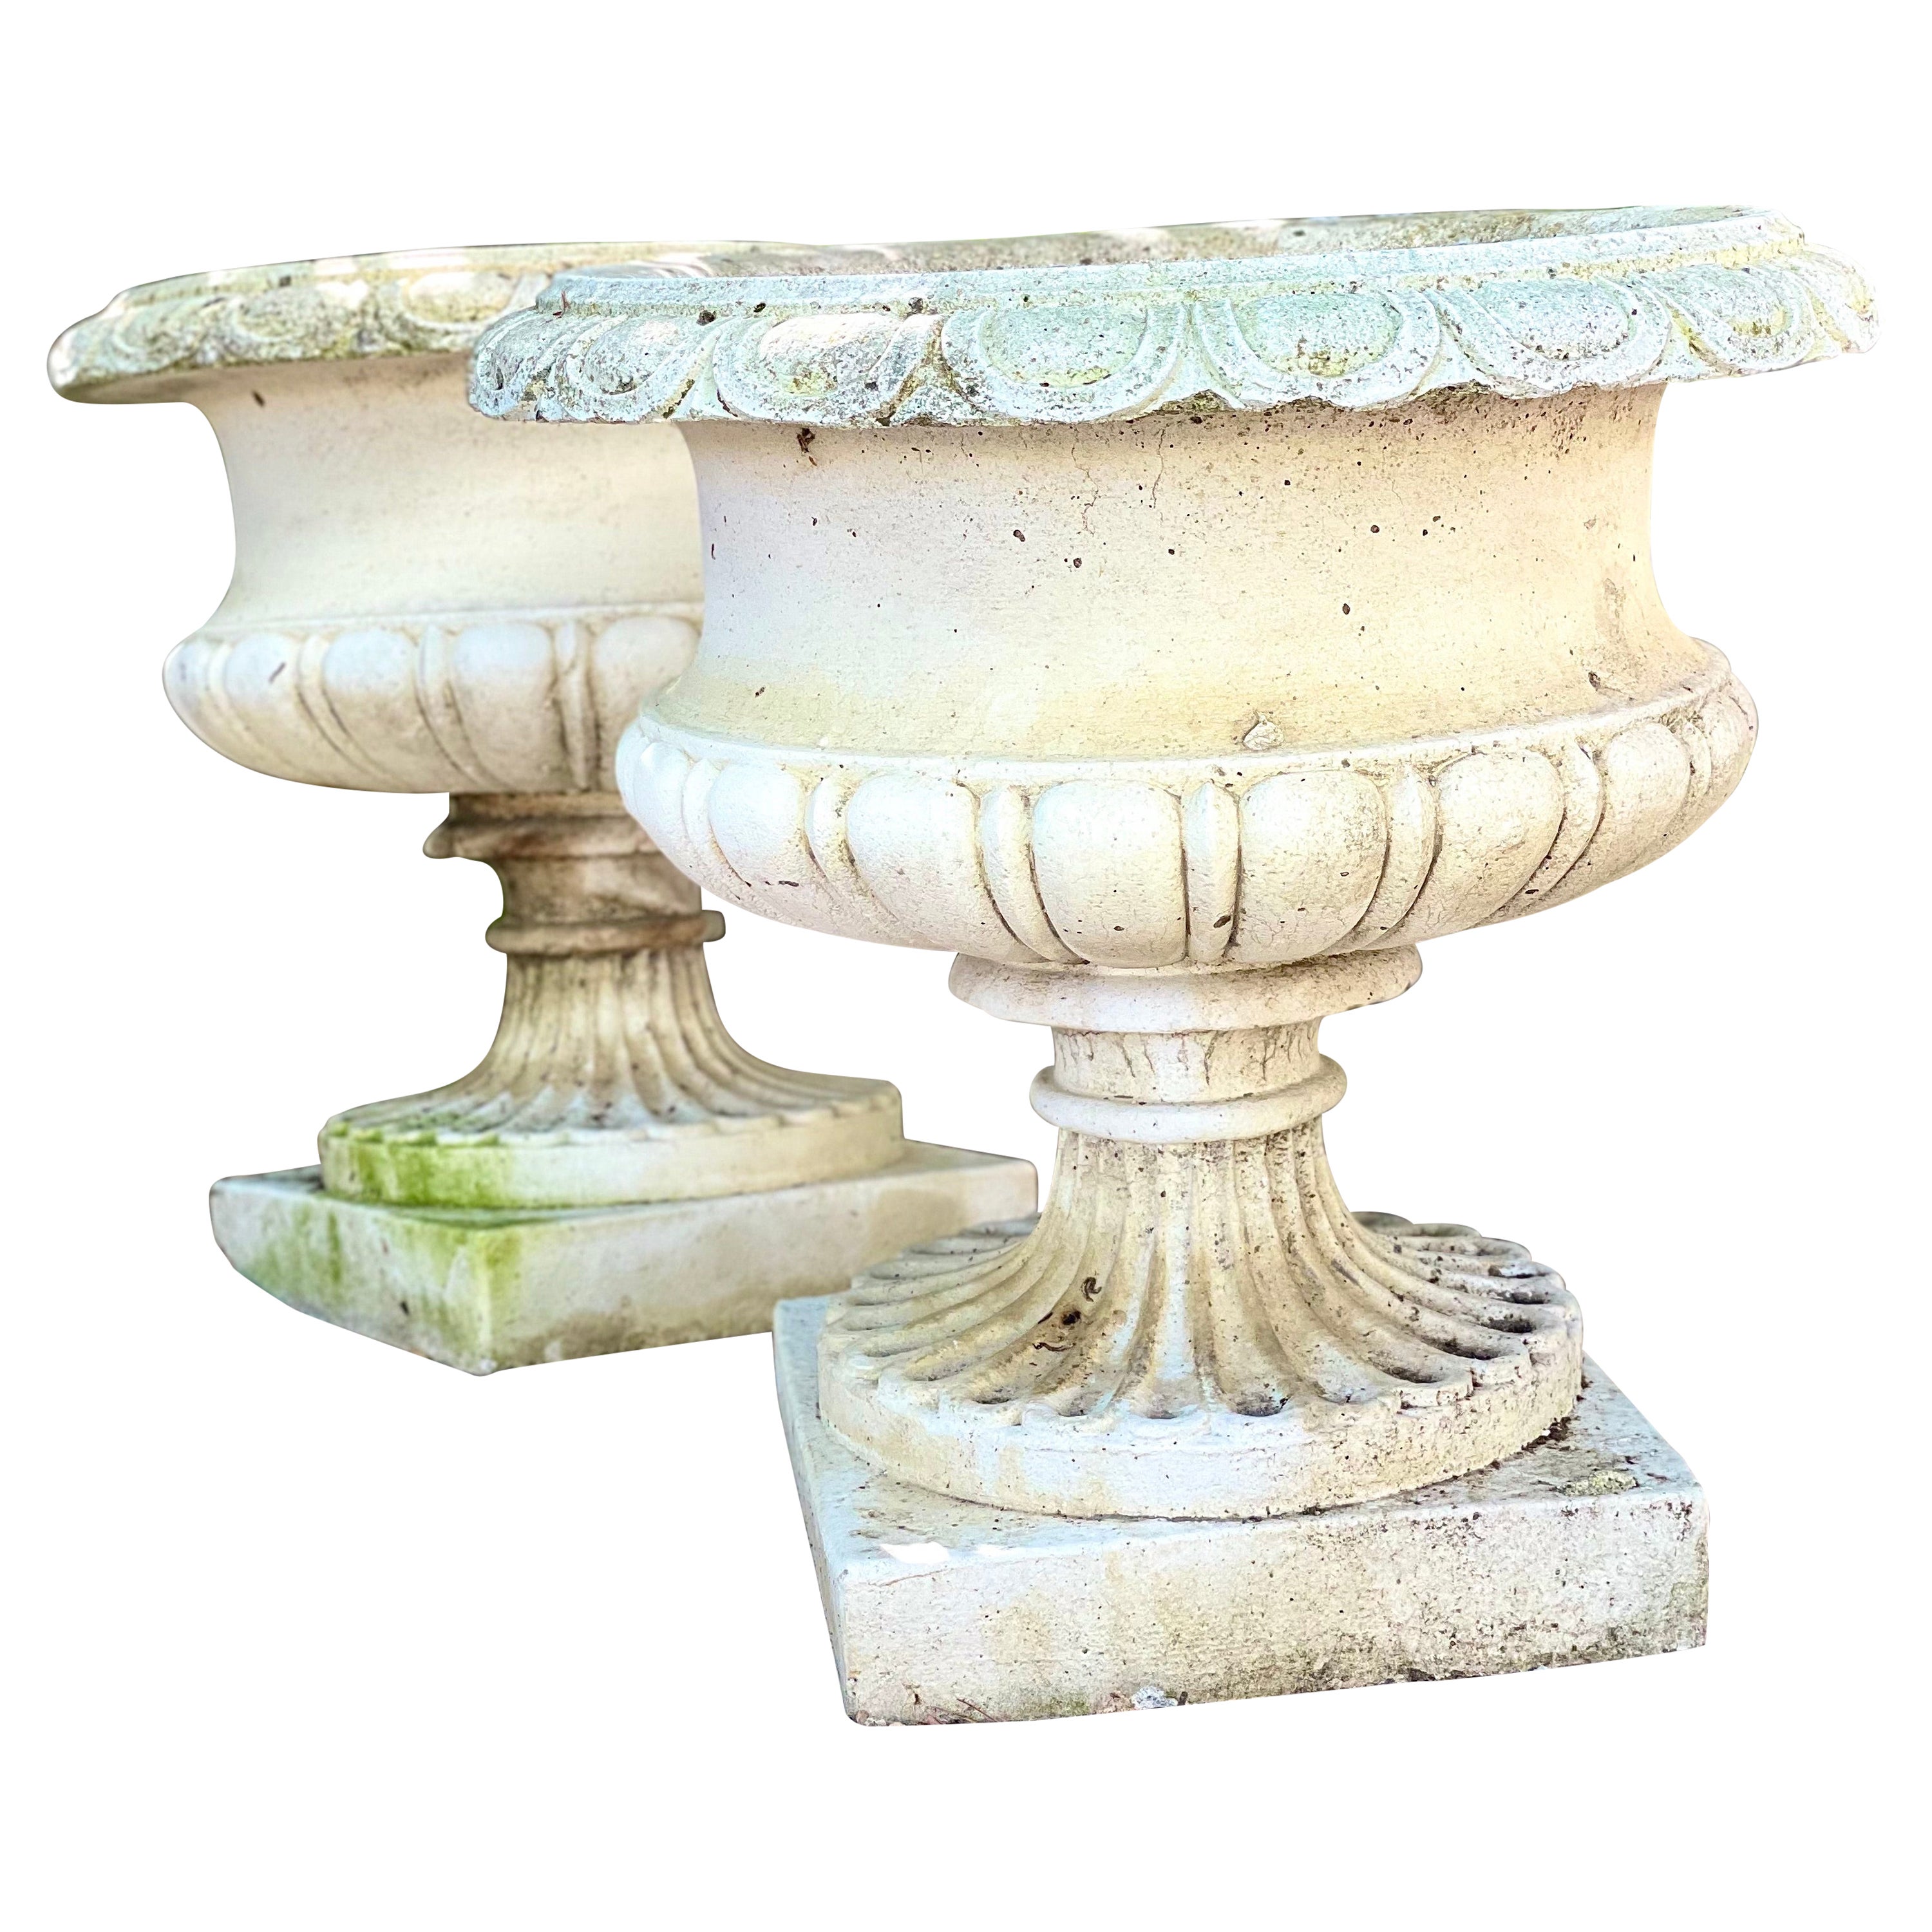 Pair of Large Antique French Garden Urns "Chambord"